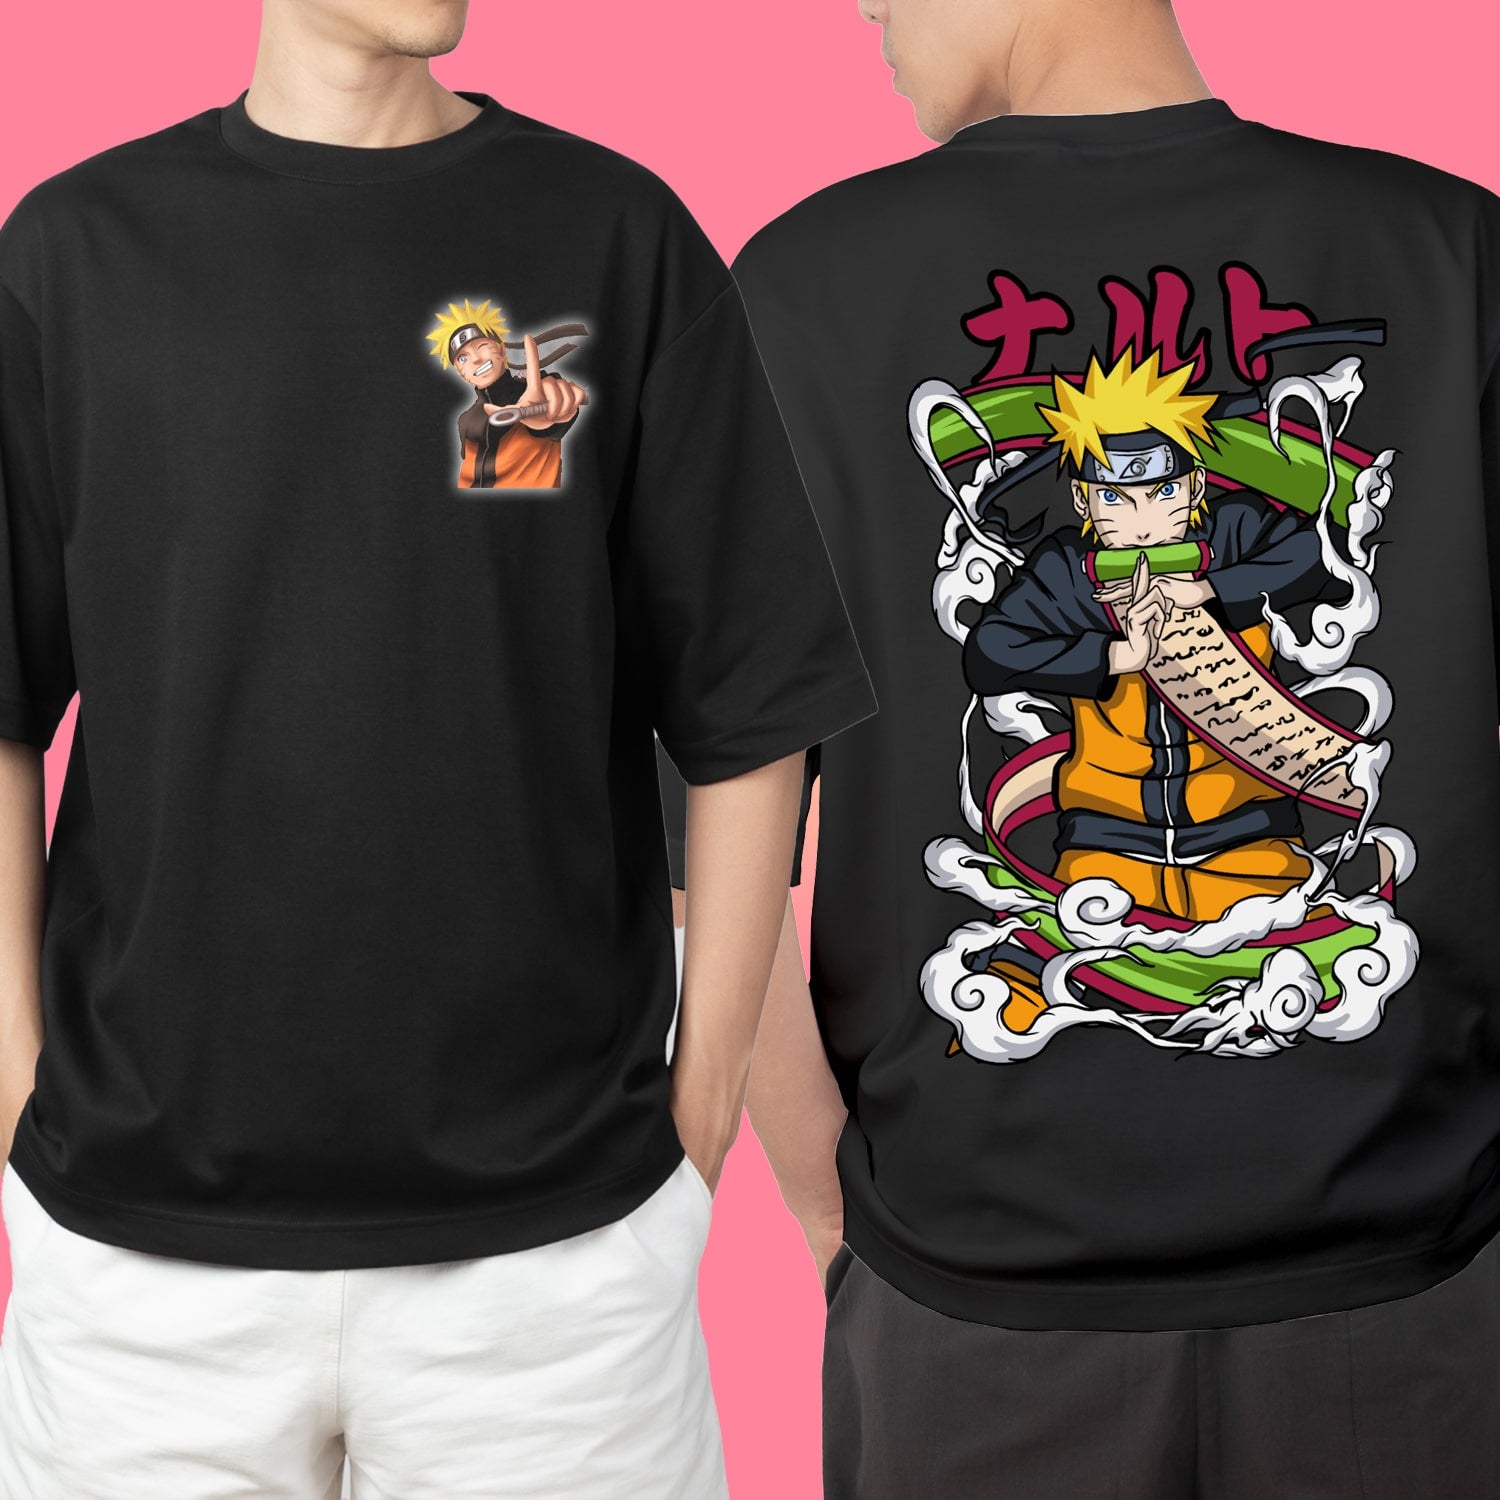 Anime Tshirt Collection Project Vol. 01 on Behance | Anime tshirt, Graphic  design photo, Anime